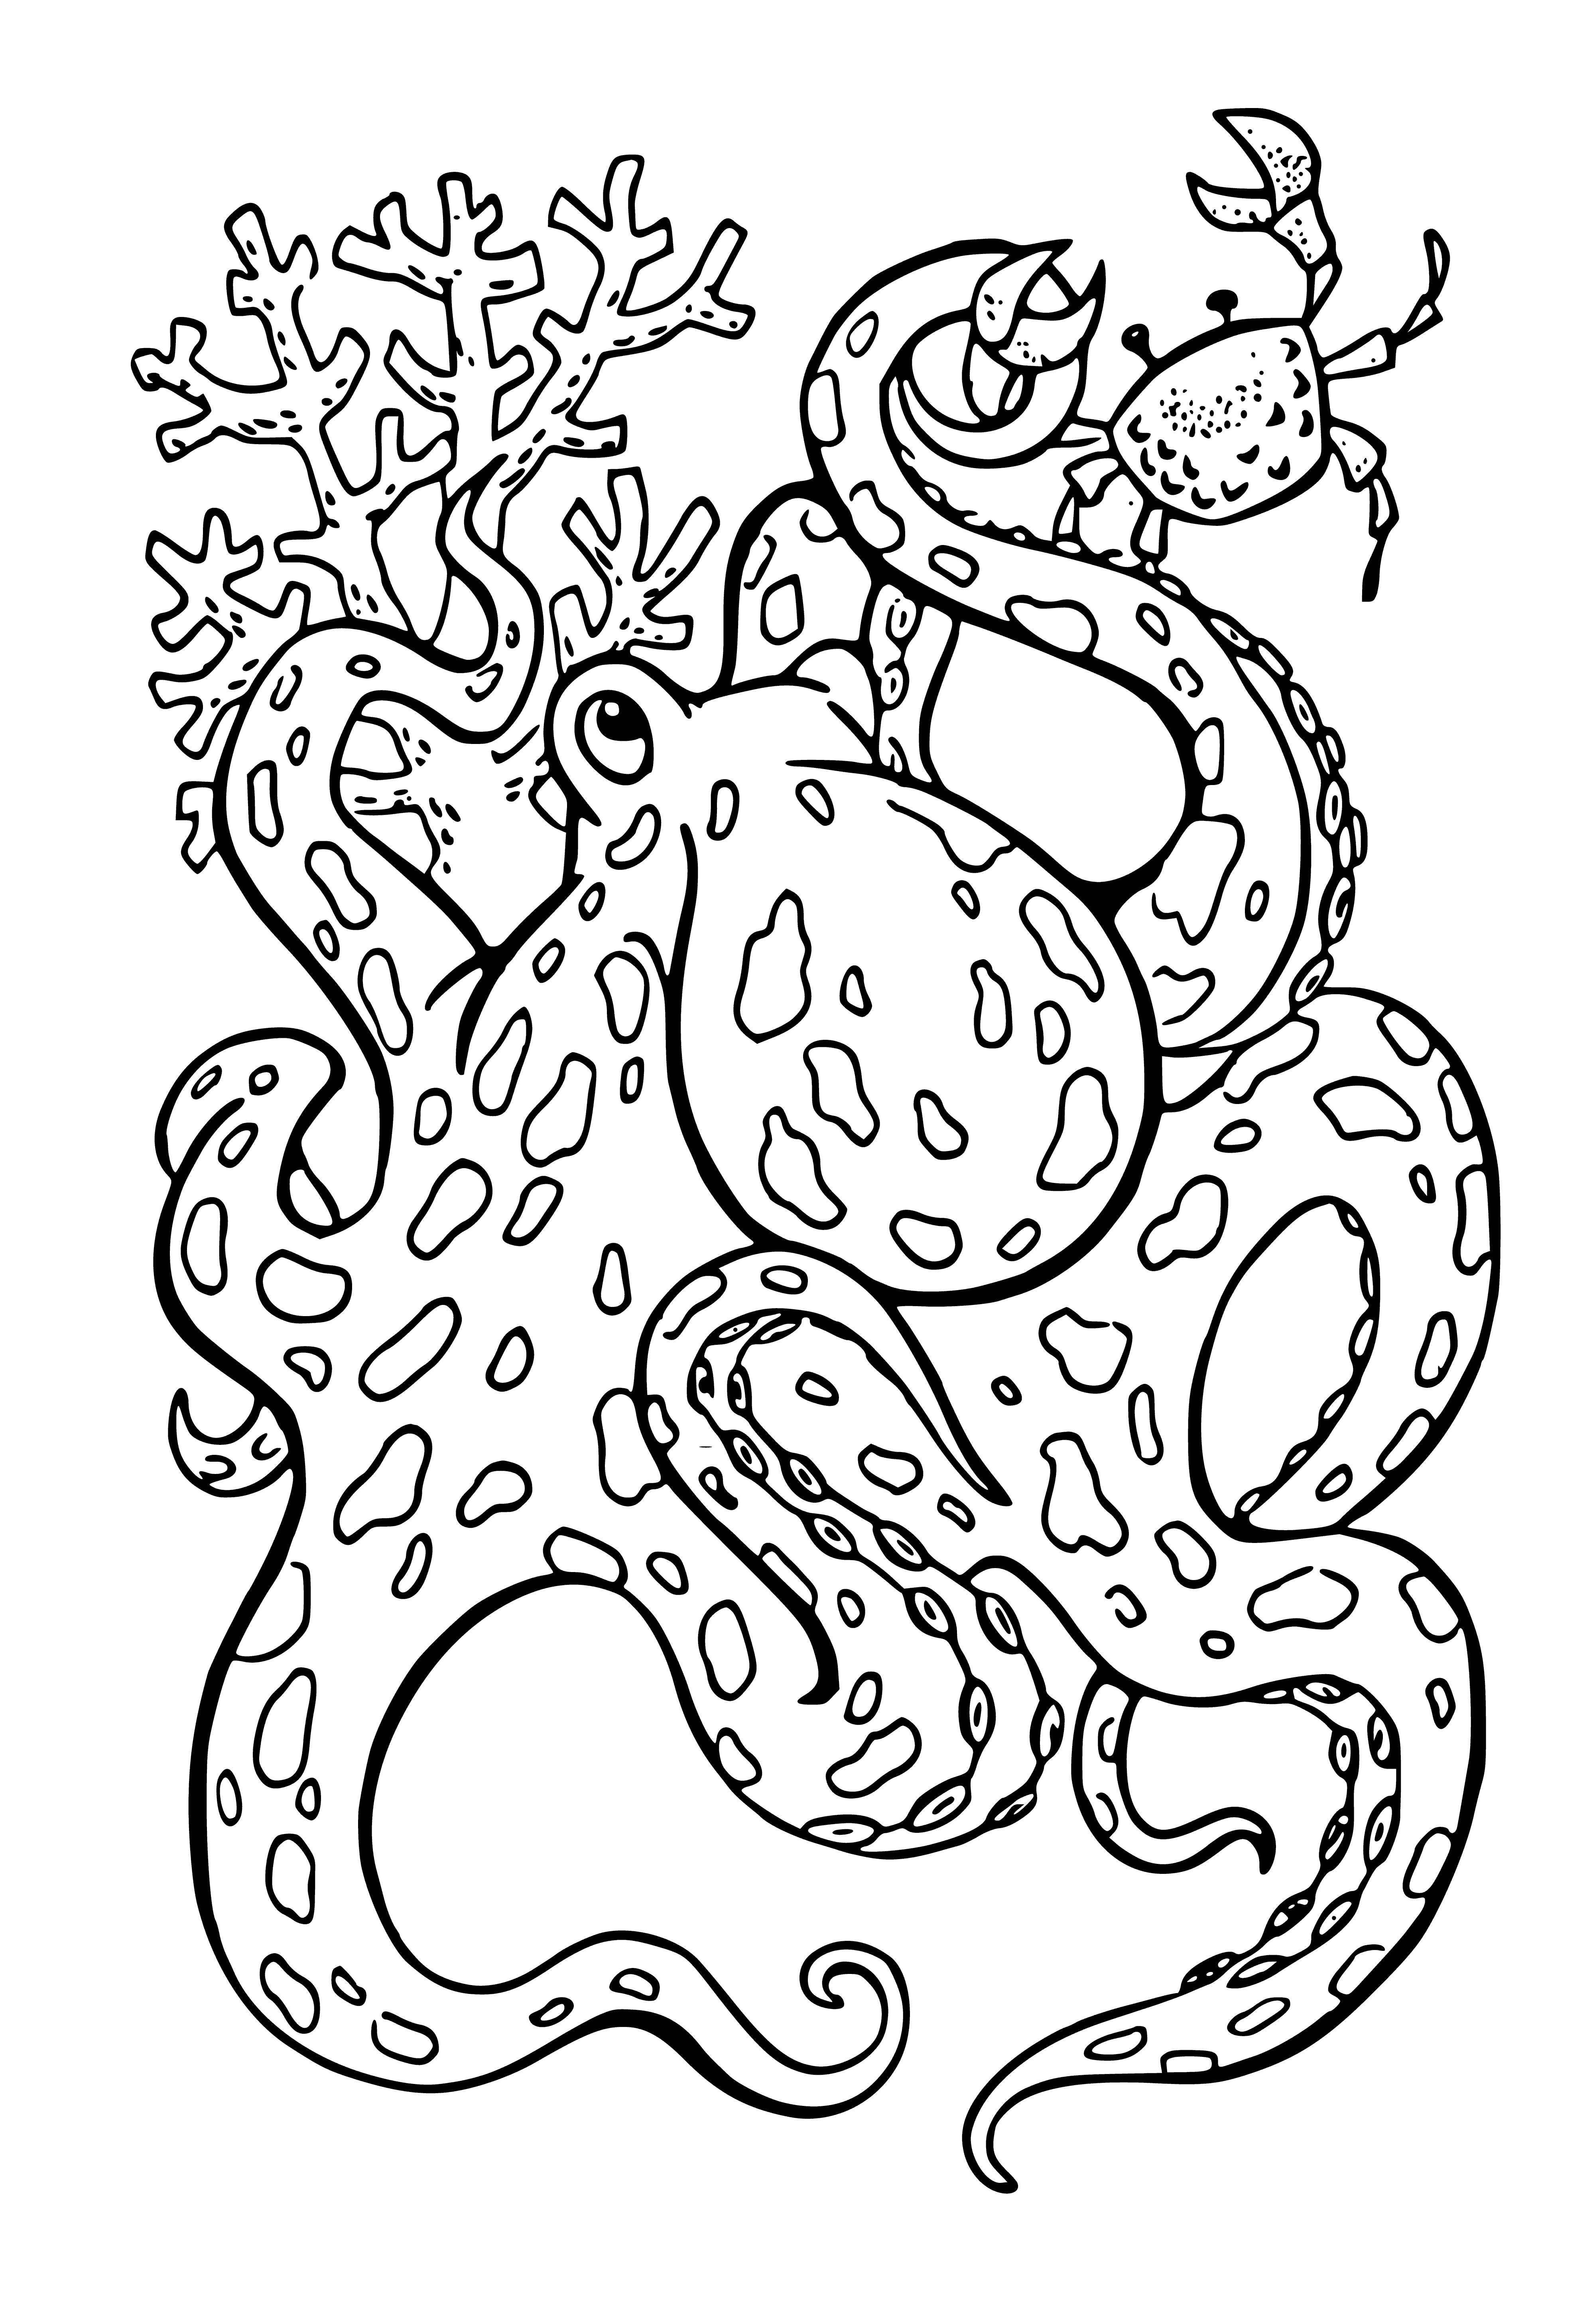 coloring page: A small orange octopus rests on a coral reef. It has 8 legs, 2 big eyes, a round mouth, and dark spots. #SeaCreatures